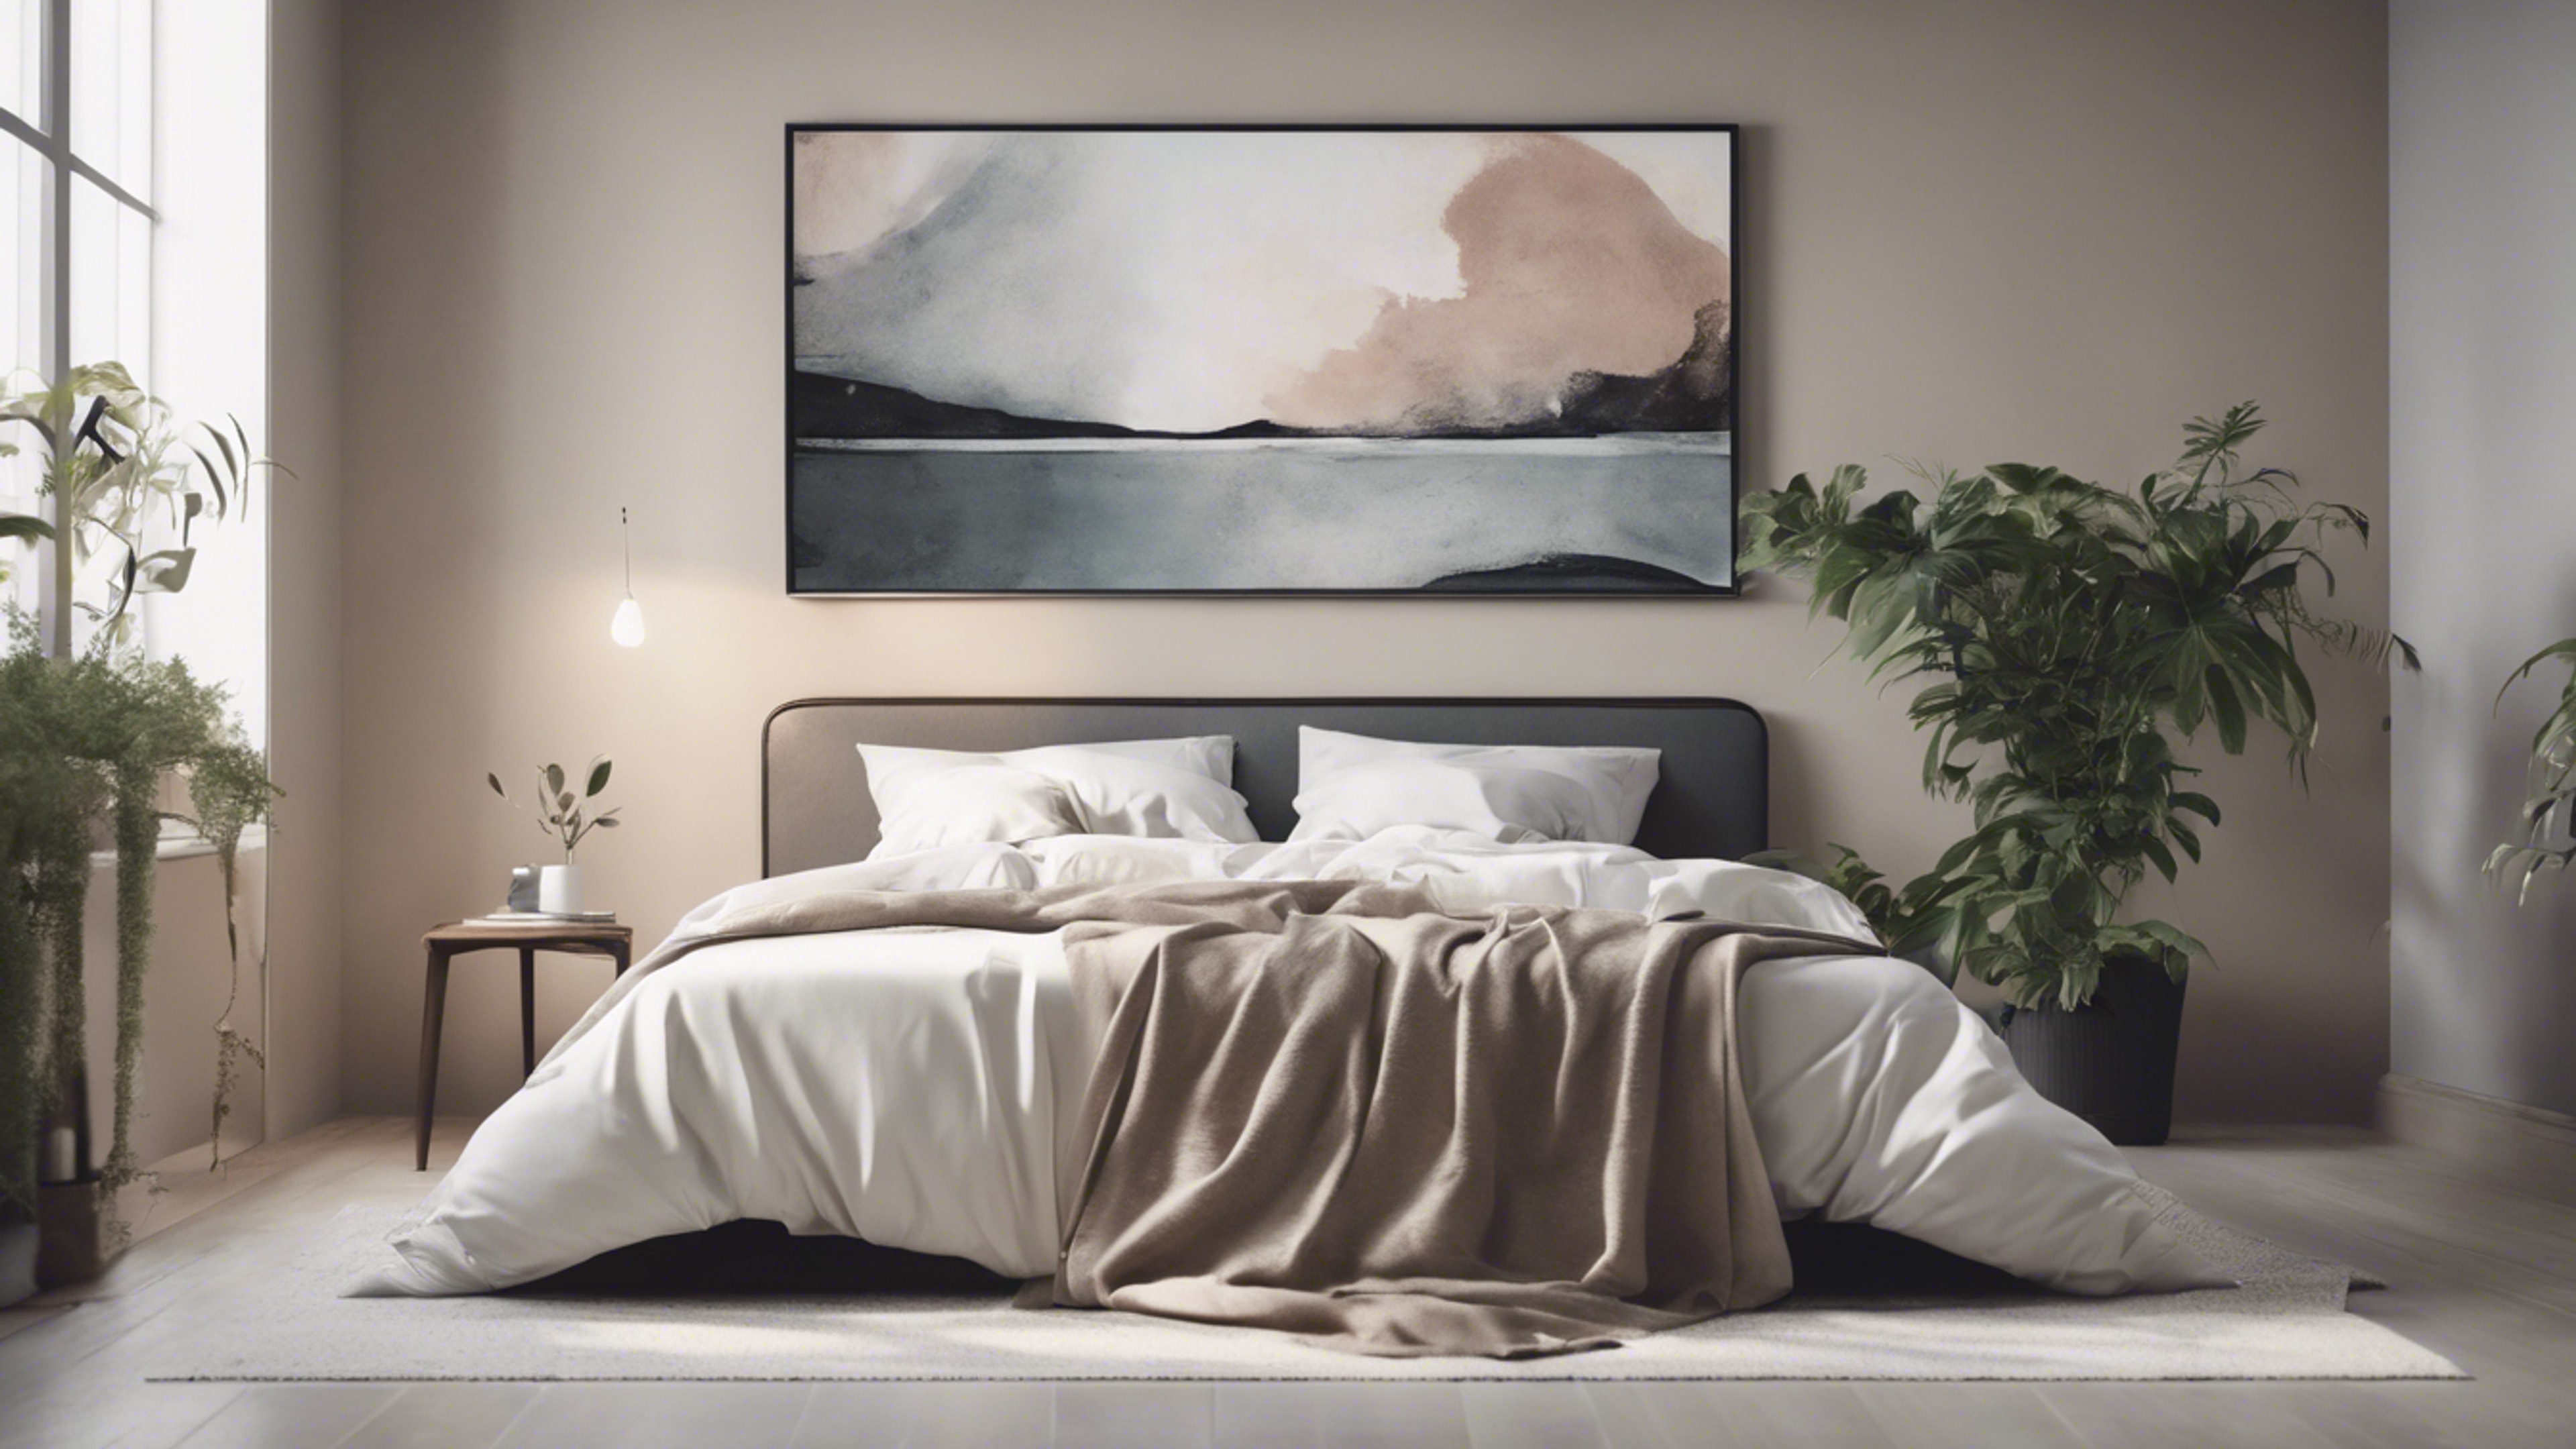 Minimalist bedroom in muted tones with a simple queen-sized bed, a potted plant, and an abstract painting. Tapeta[015f6f42387b4ed28c5e]